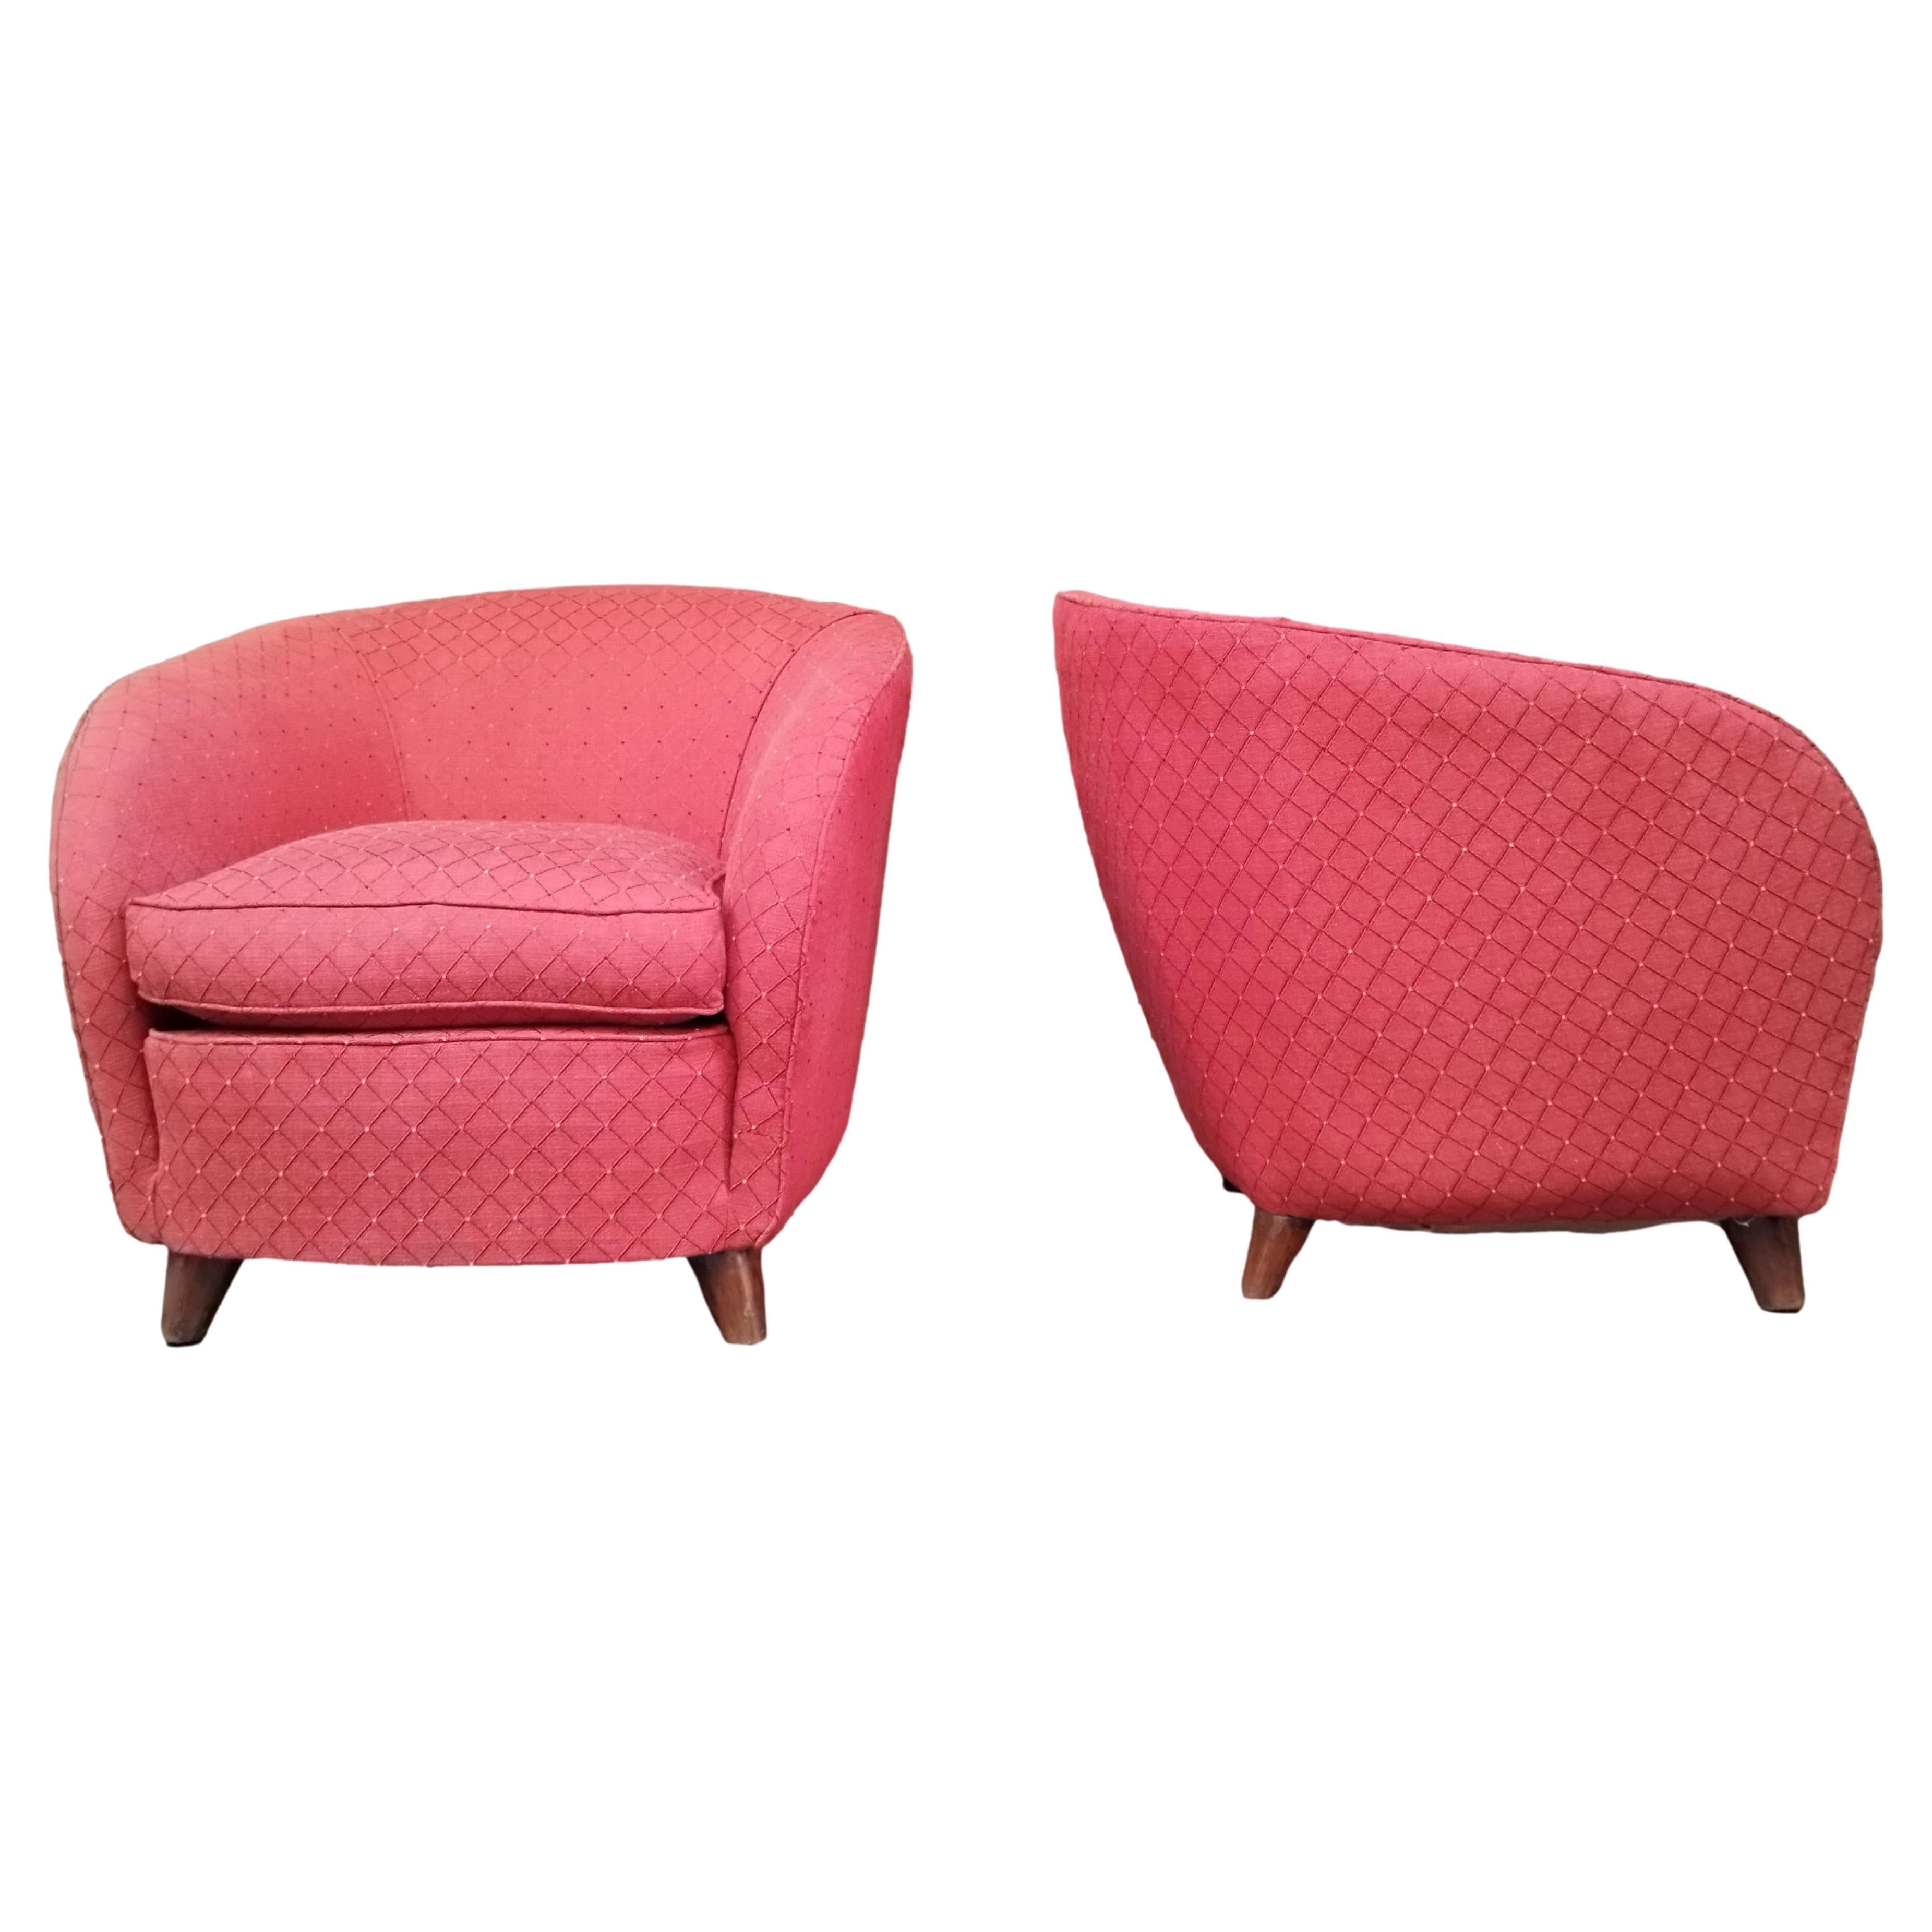 Gio Ponti Attrib. Pair of Red Fabric Armchairs, Italy 1950s For Sale